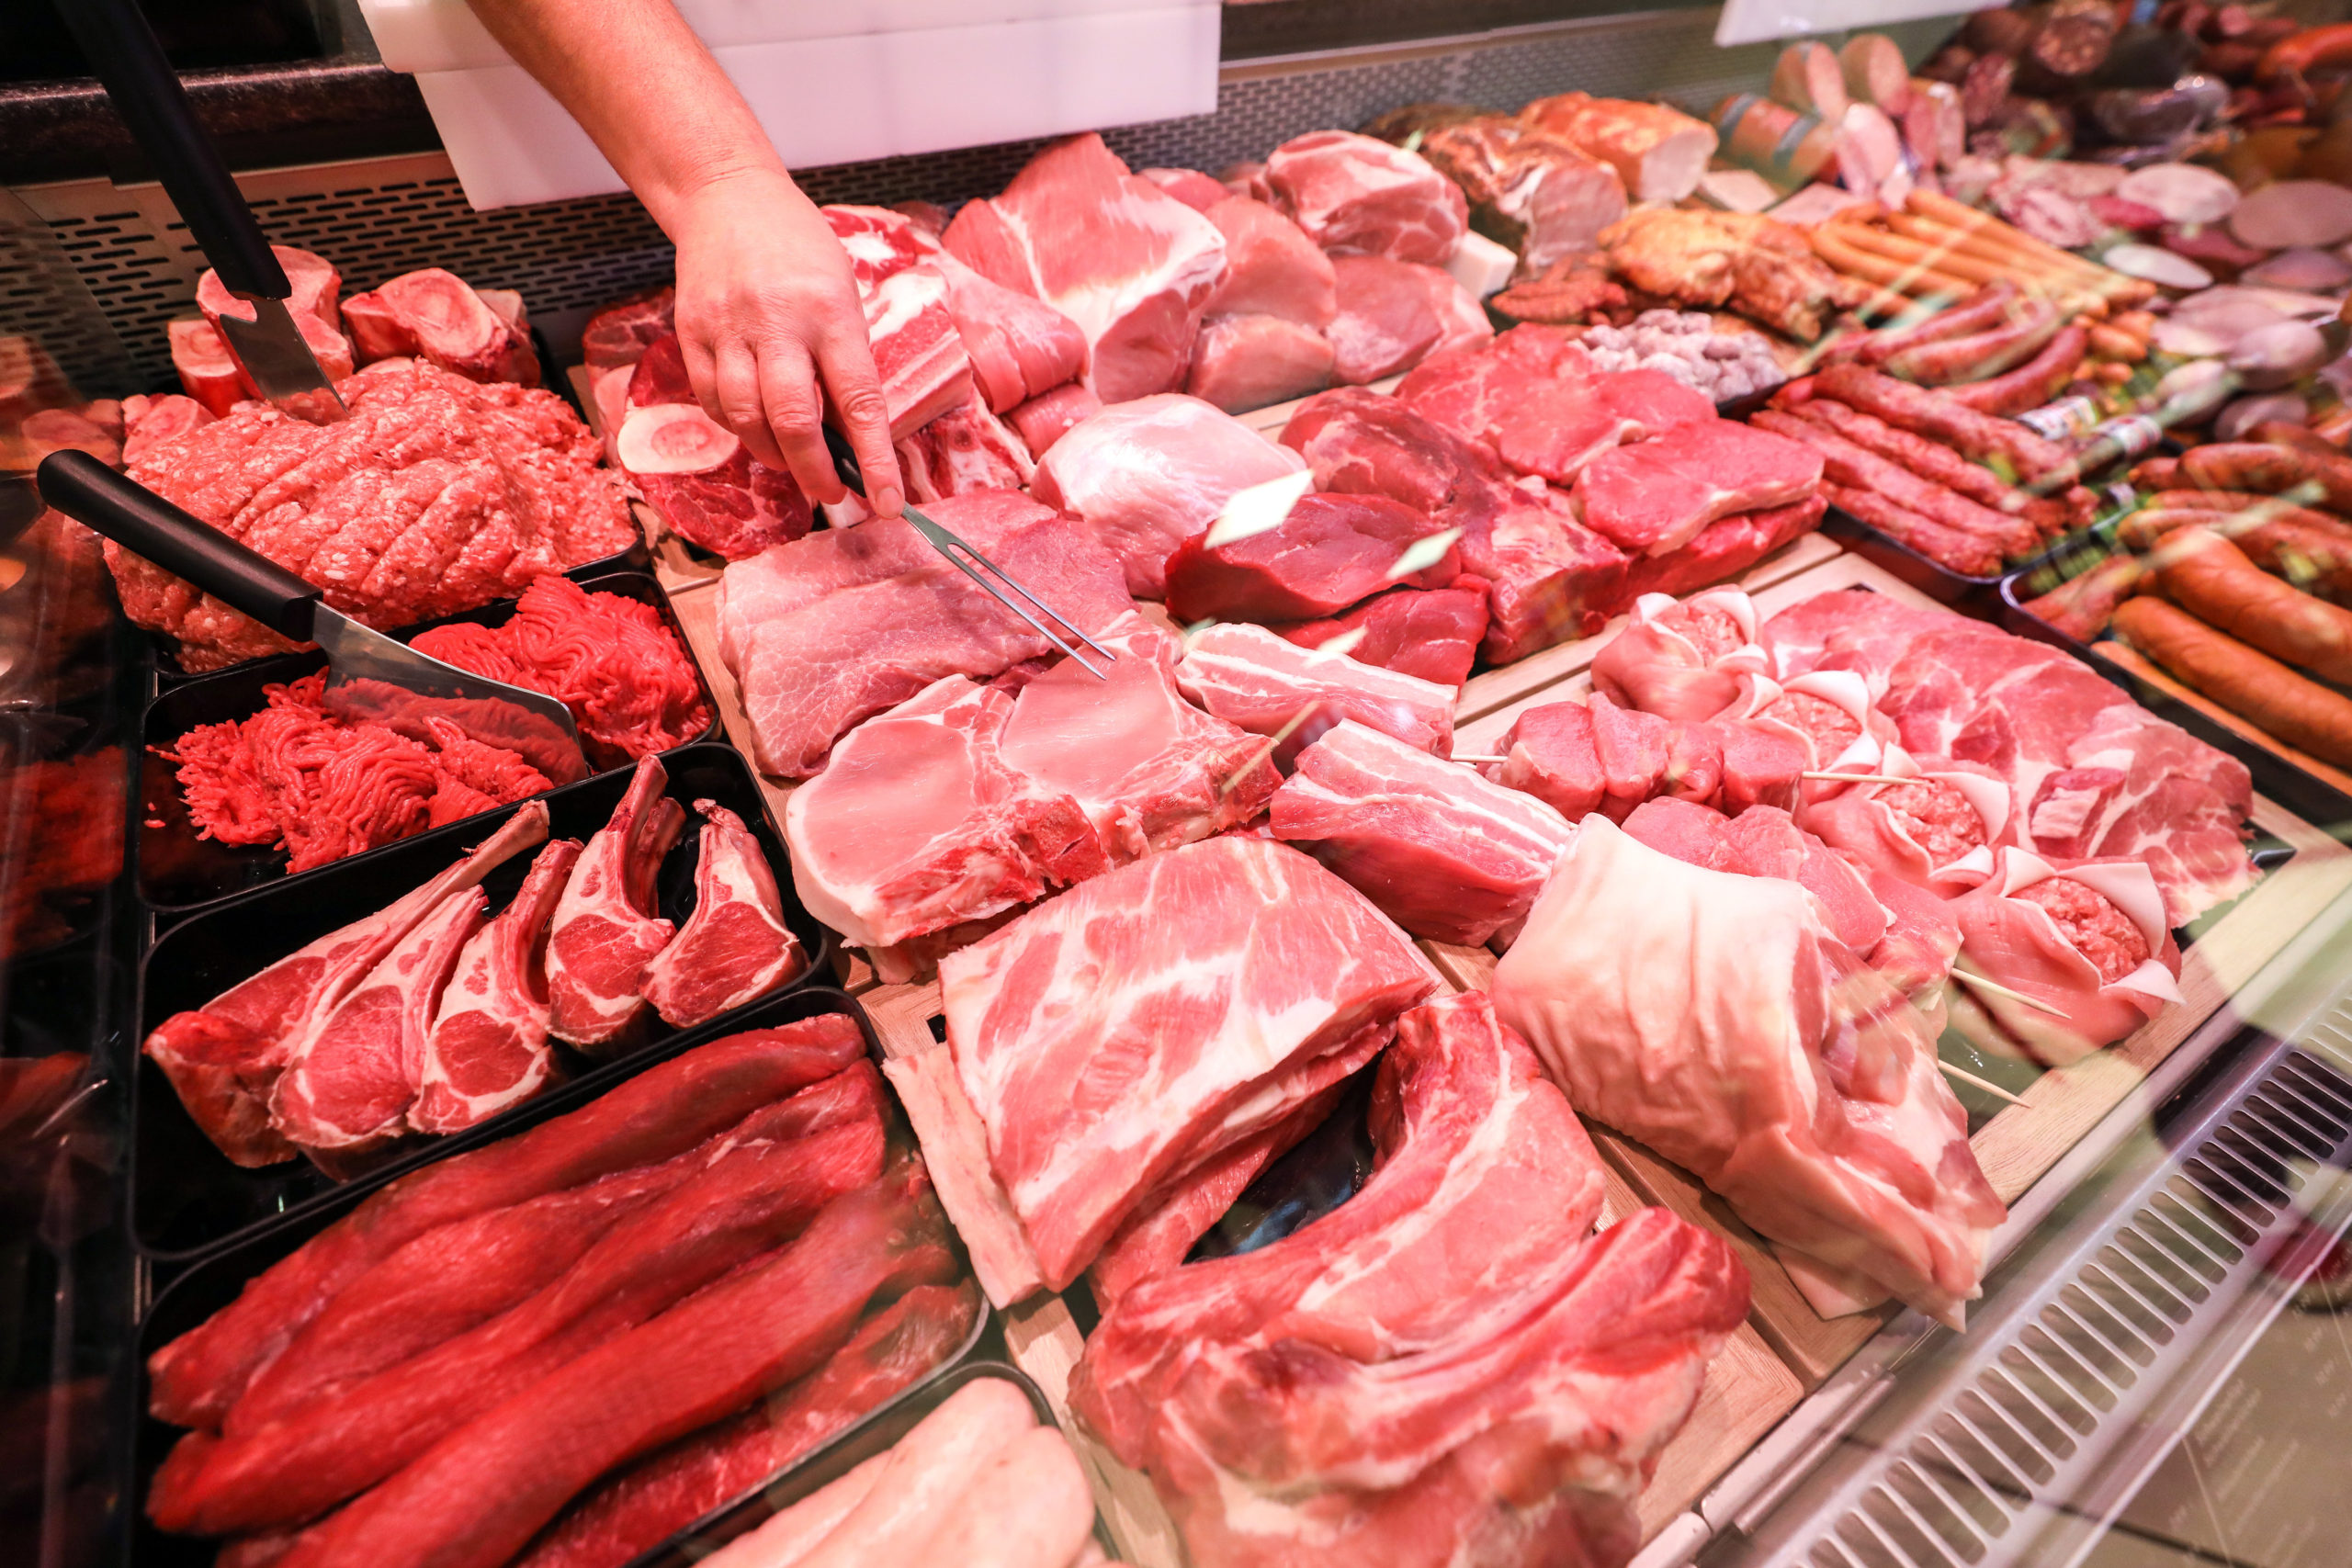  Pork and beef lie in a meat counter in a supermarket.